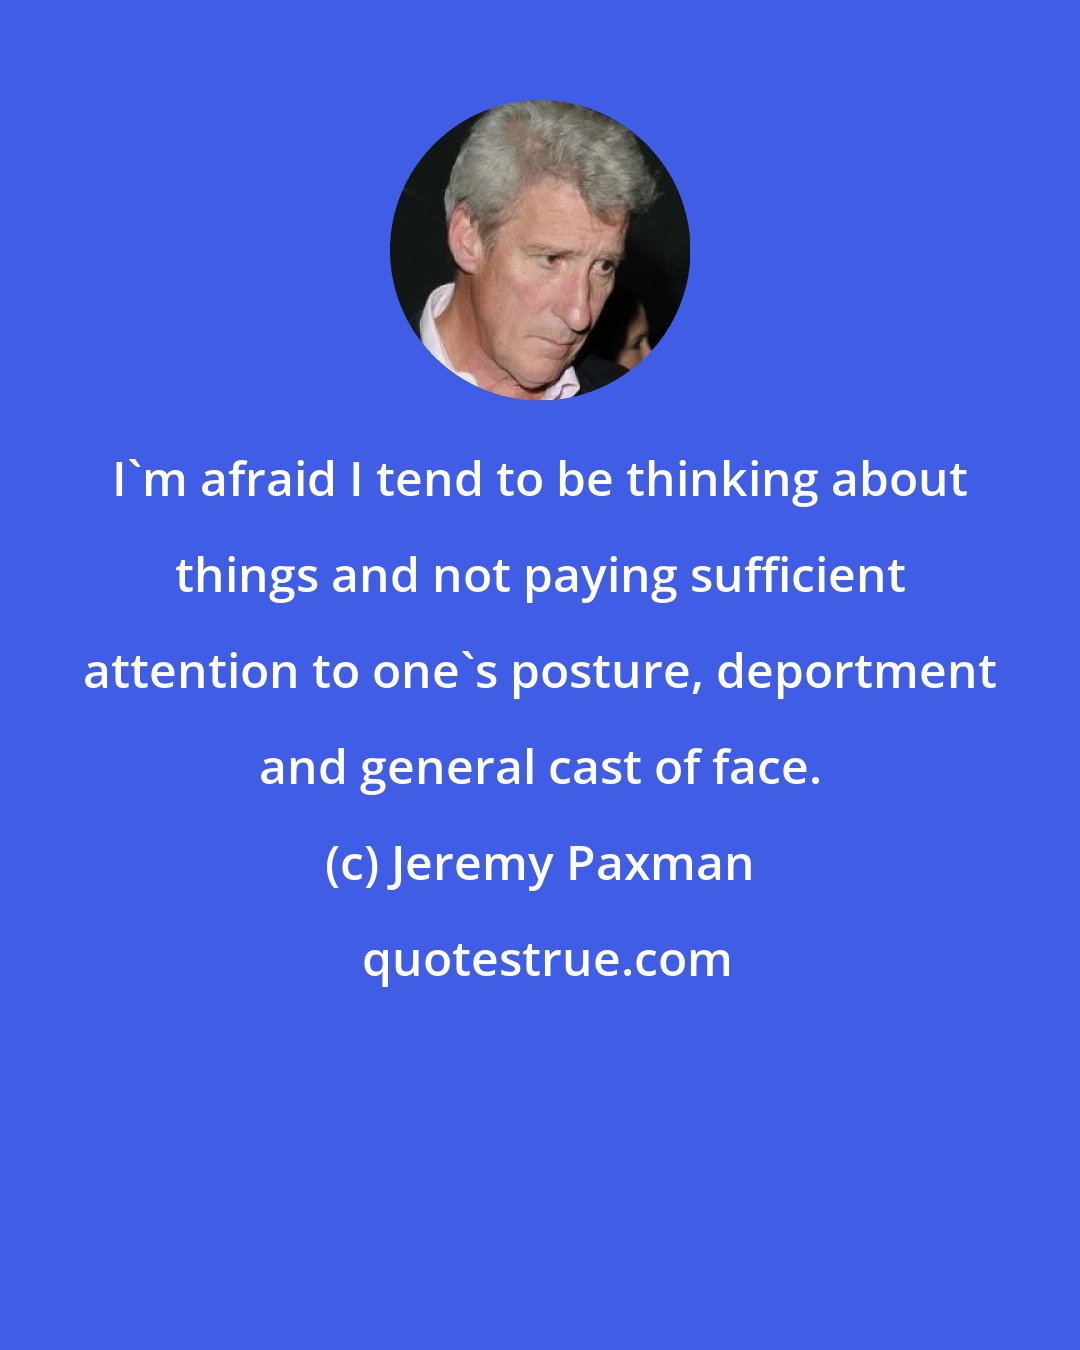 Jeremy Paxman: I'm afraid I tend to be thinking about things and not paying sufficient attention to one's posture, deportment and general cast of face.